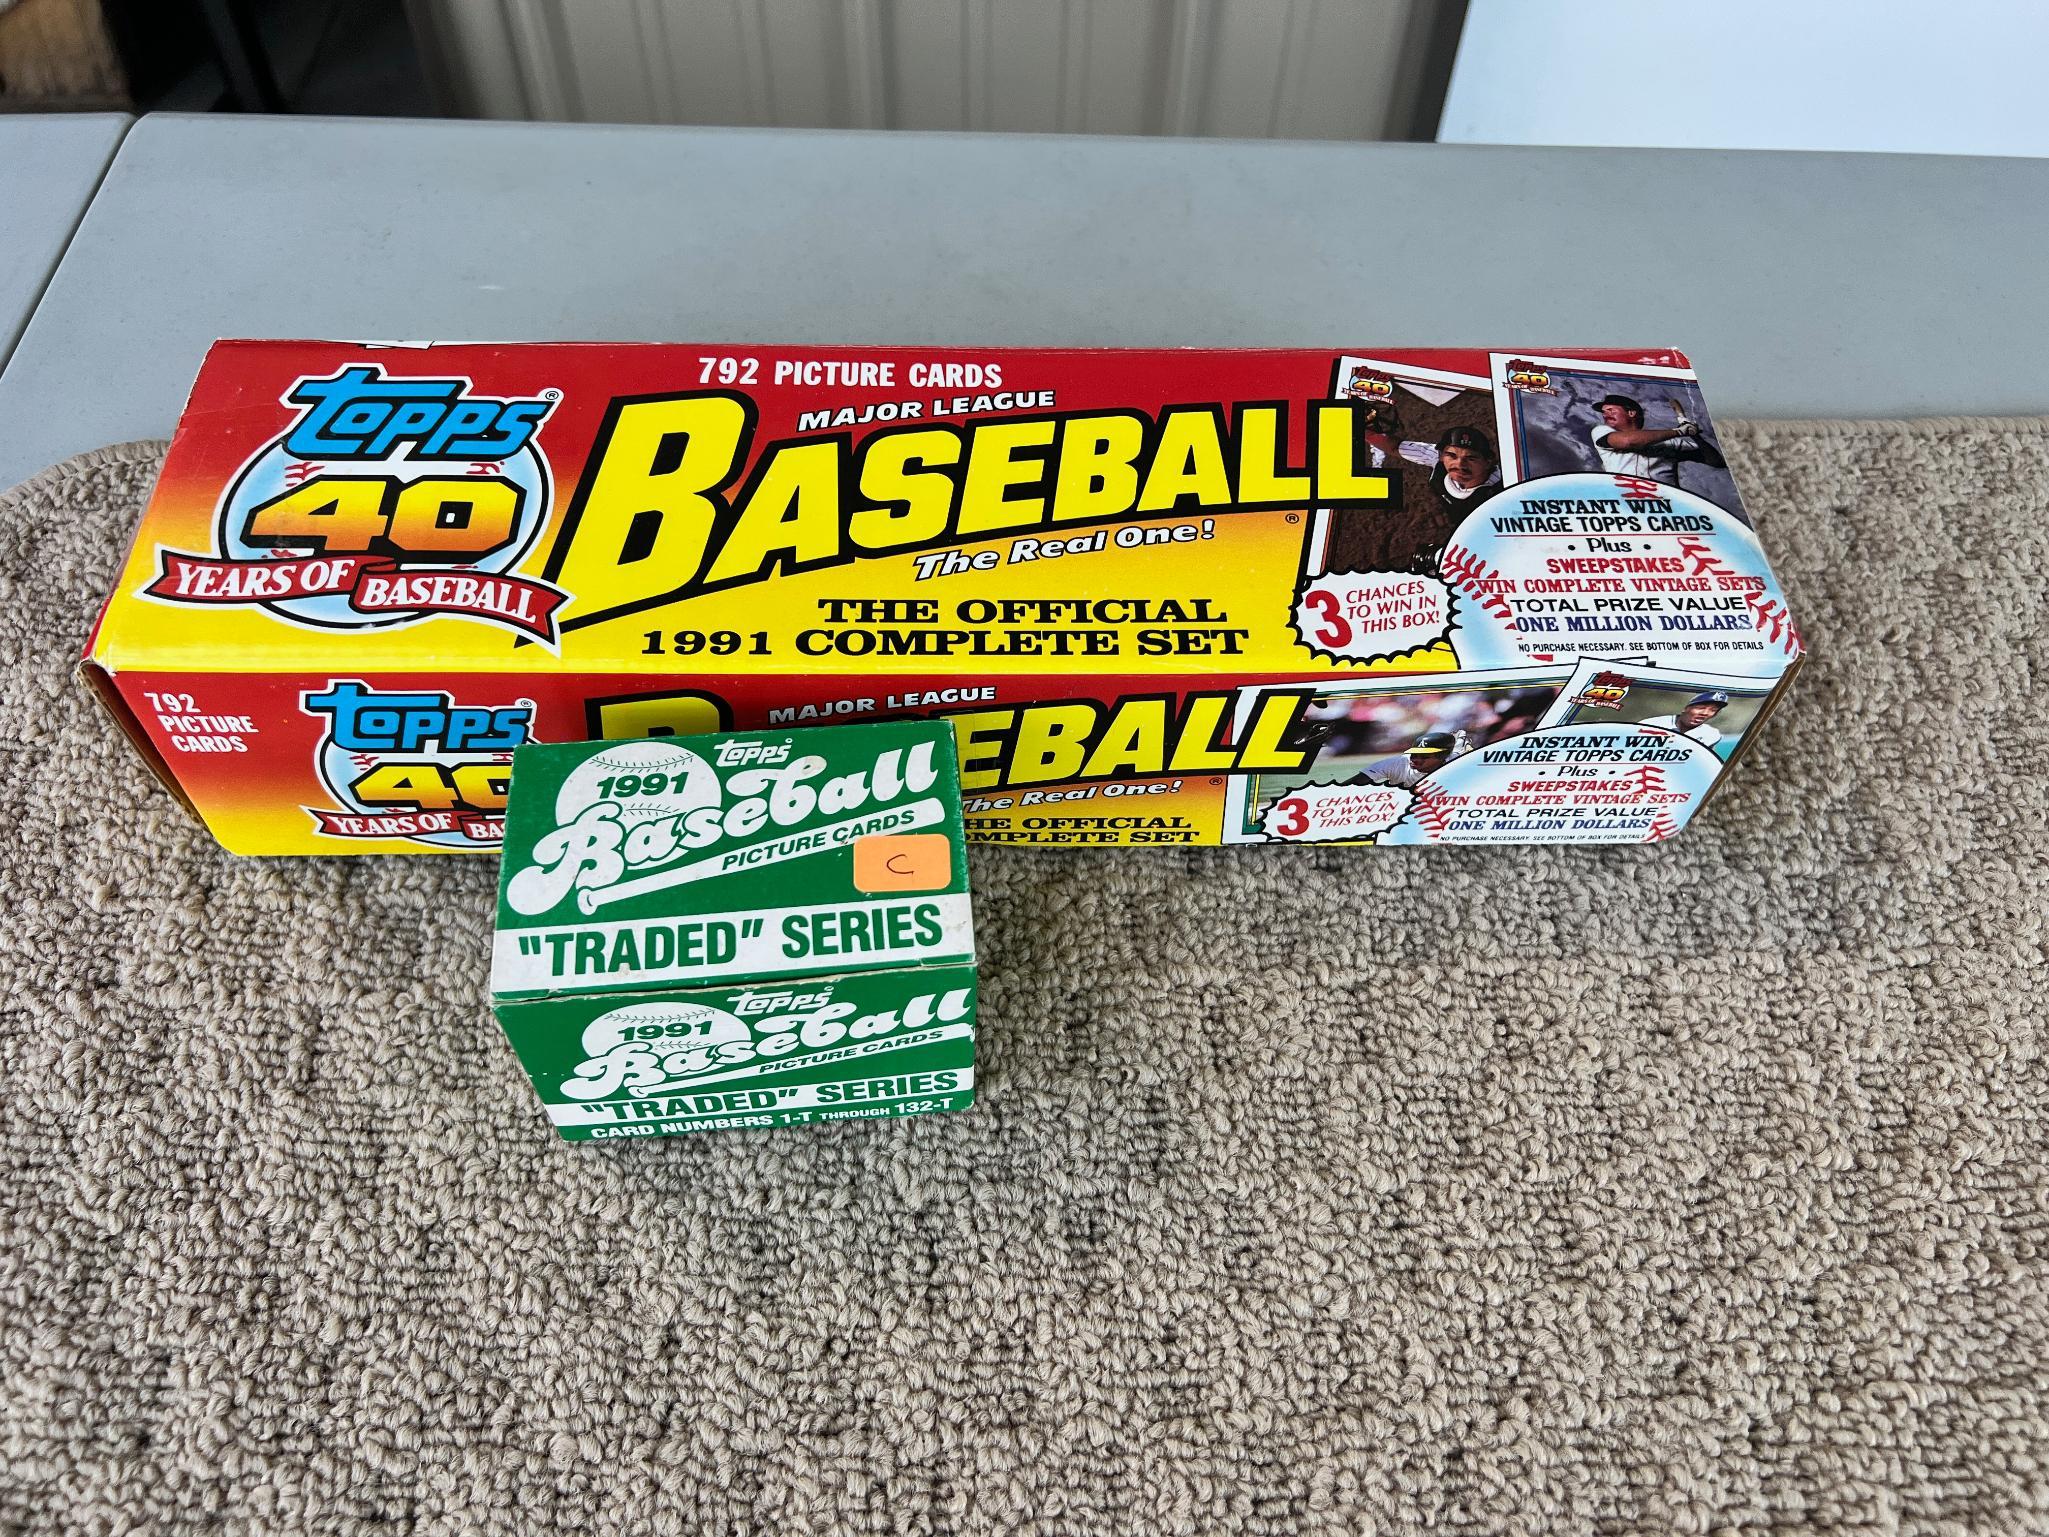 1991 Topps Baseball Complete Set with 1991 Topps